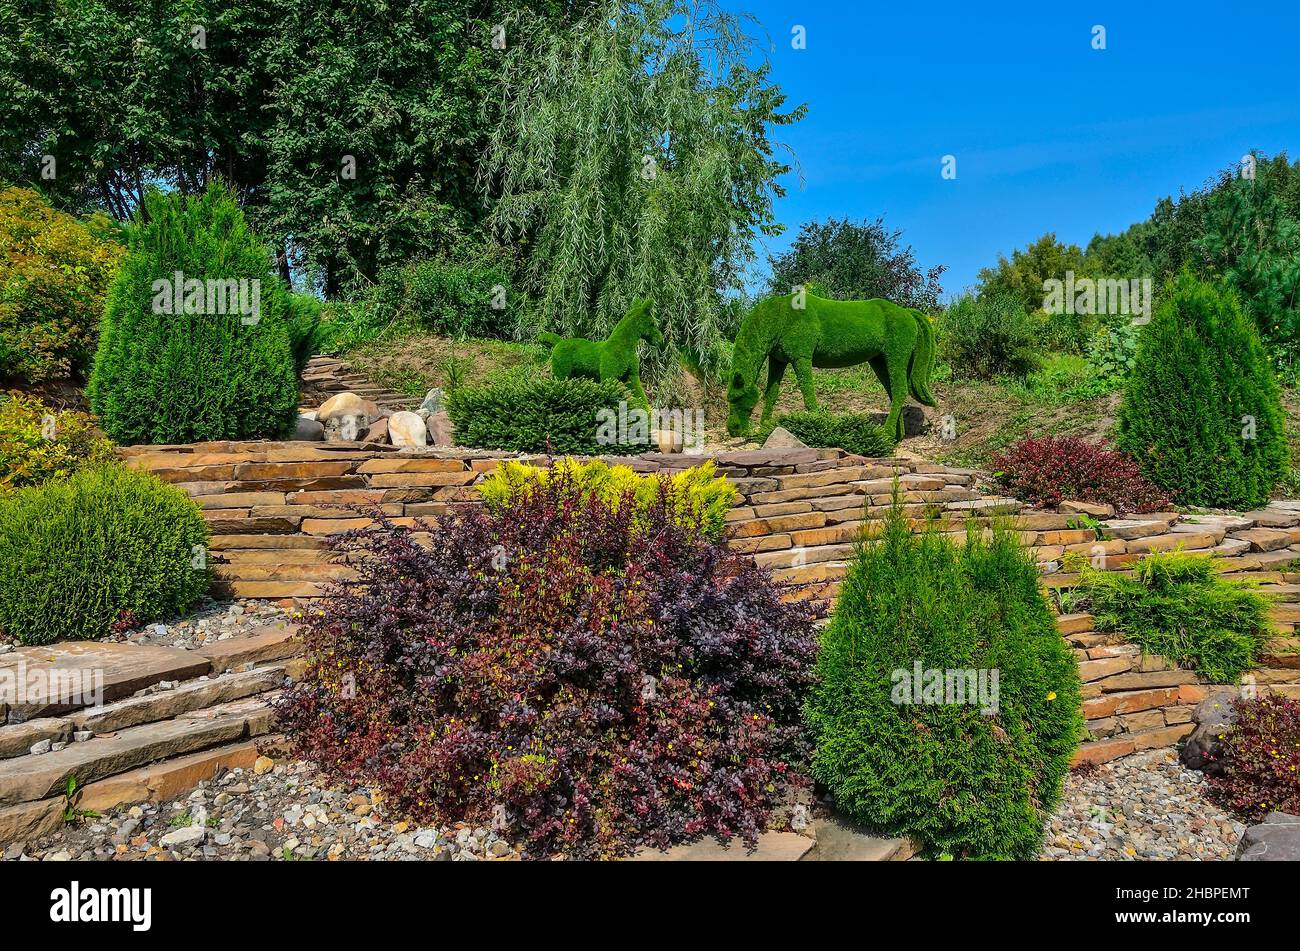 Green sculptures of horse and small foal created from artificial grass - gardens topiary. Creative idea for landscape design. Decorative plants: thuja Stock Photo